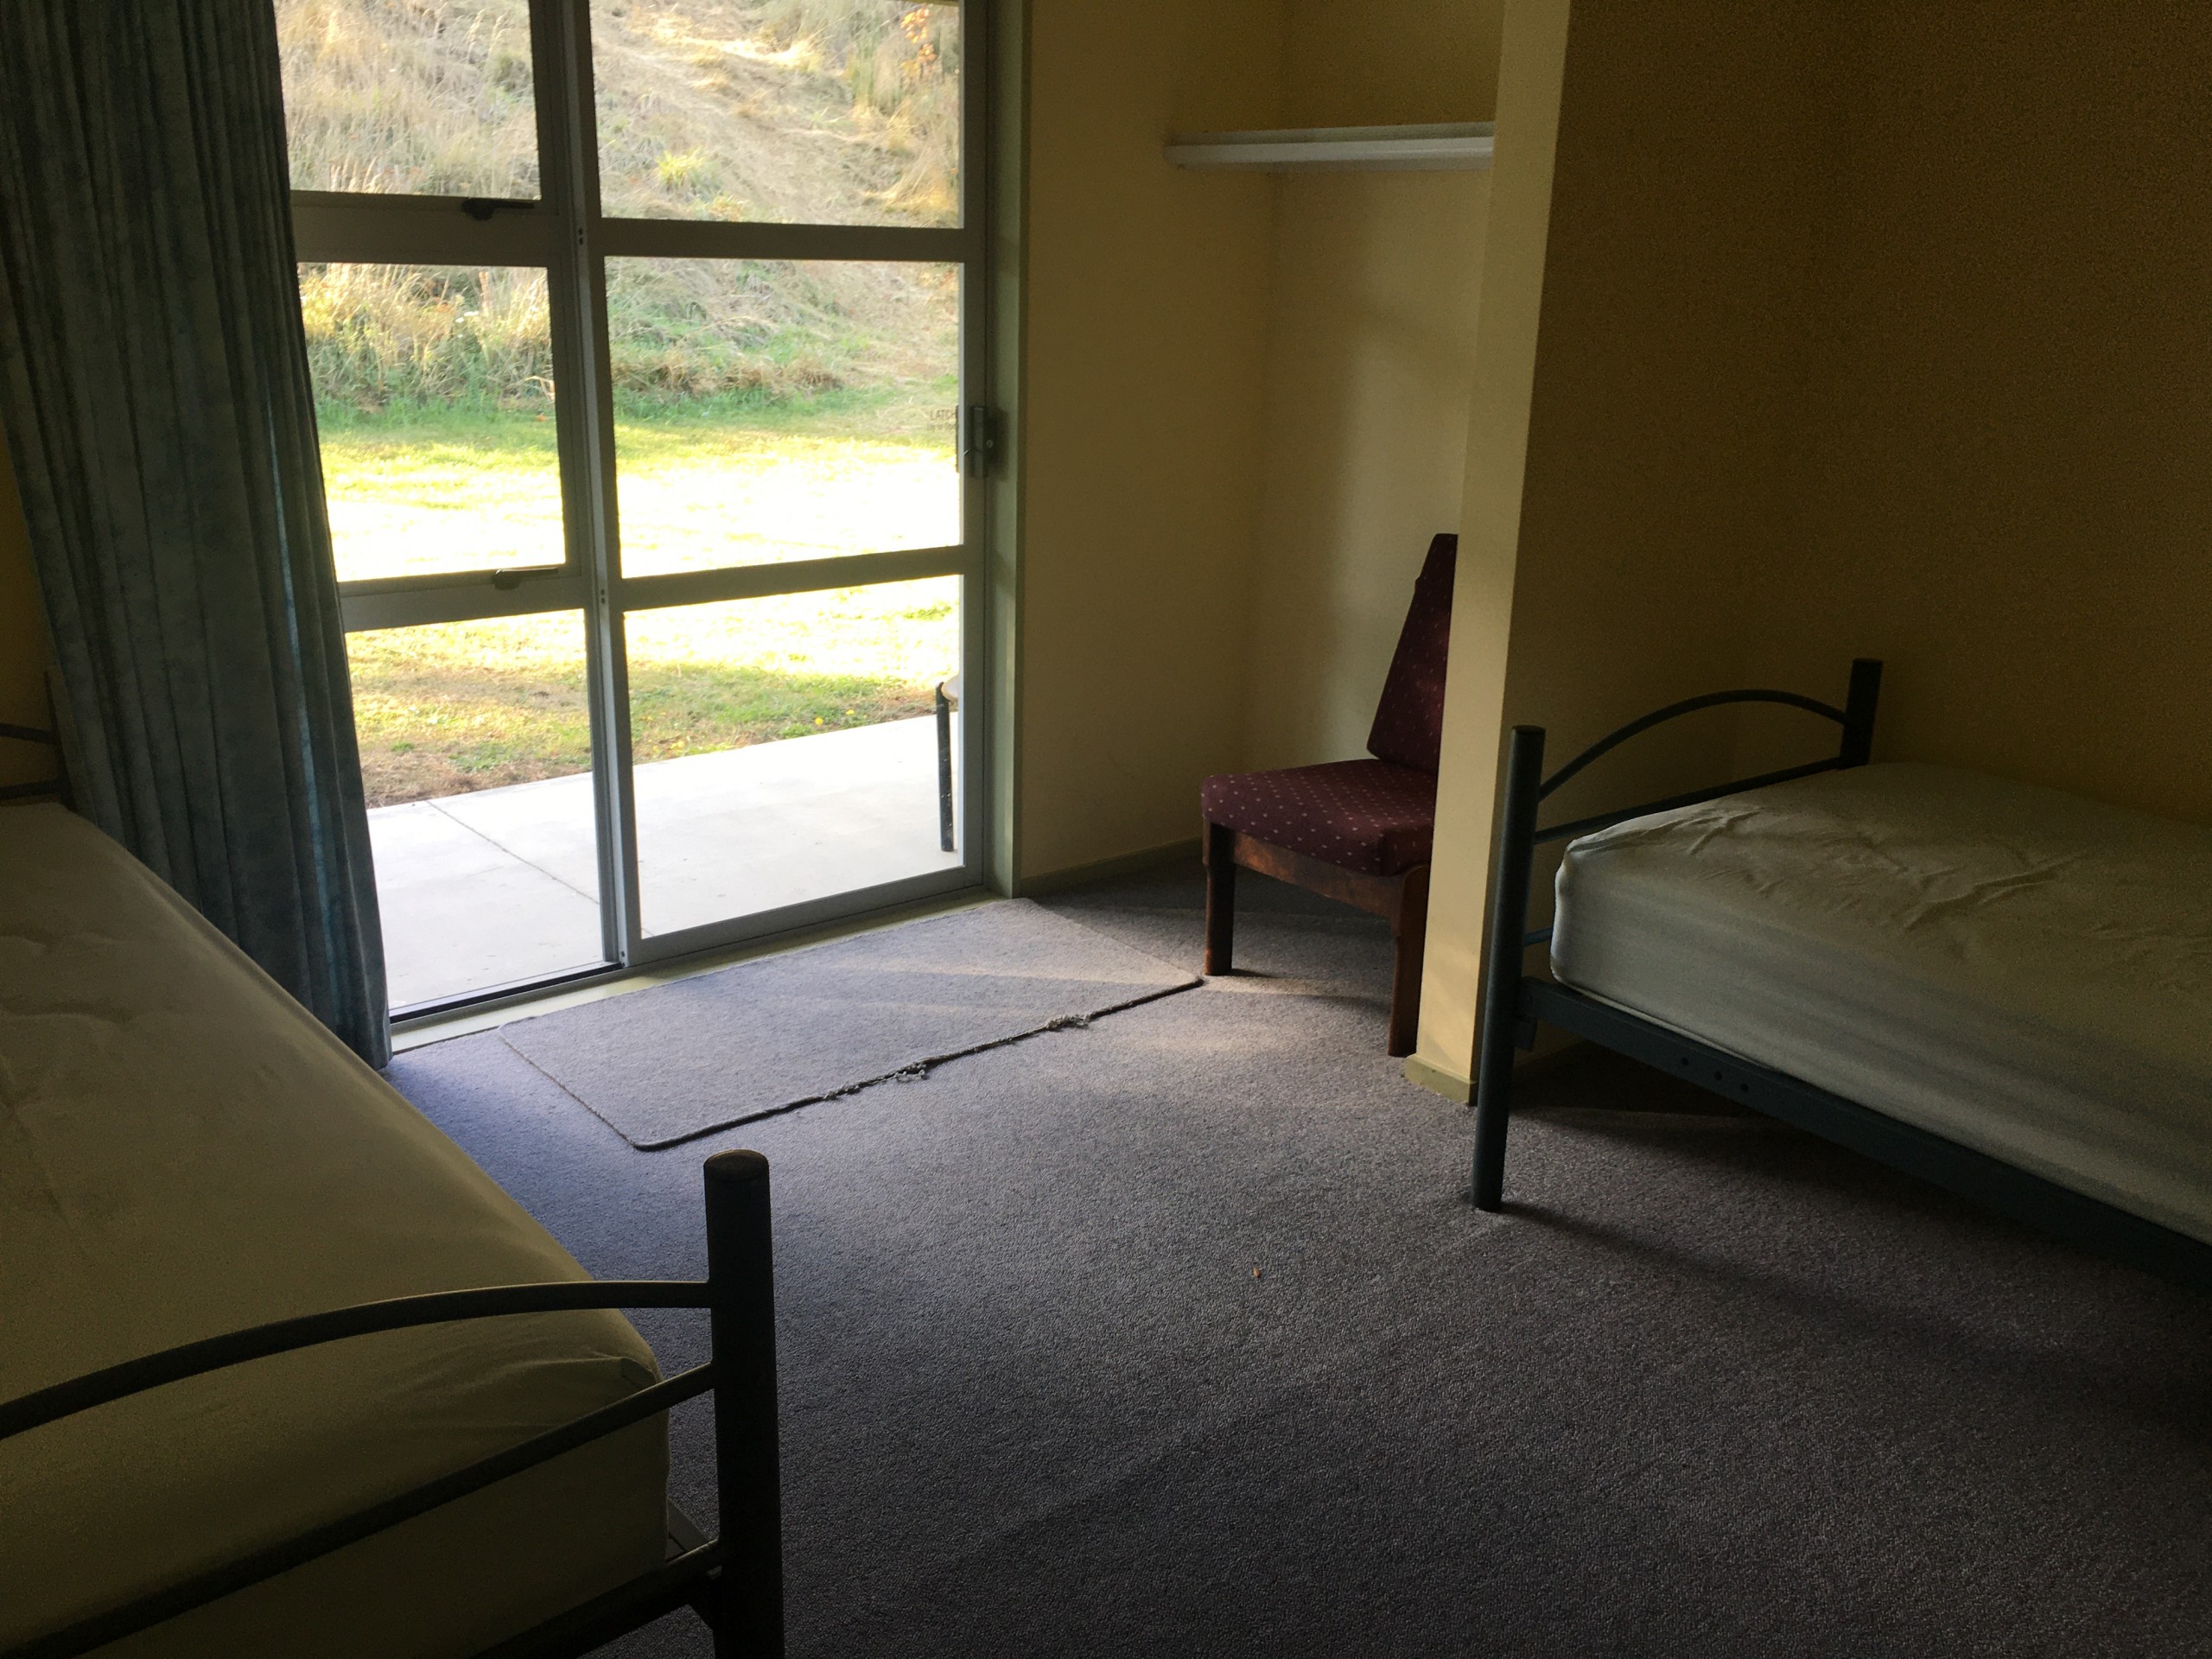 Bellbird Rooms 4 & 5 have two single beds and share a wet floor shower